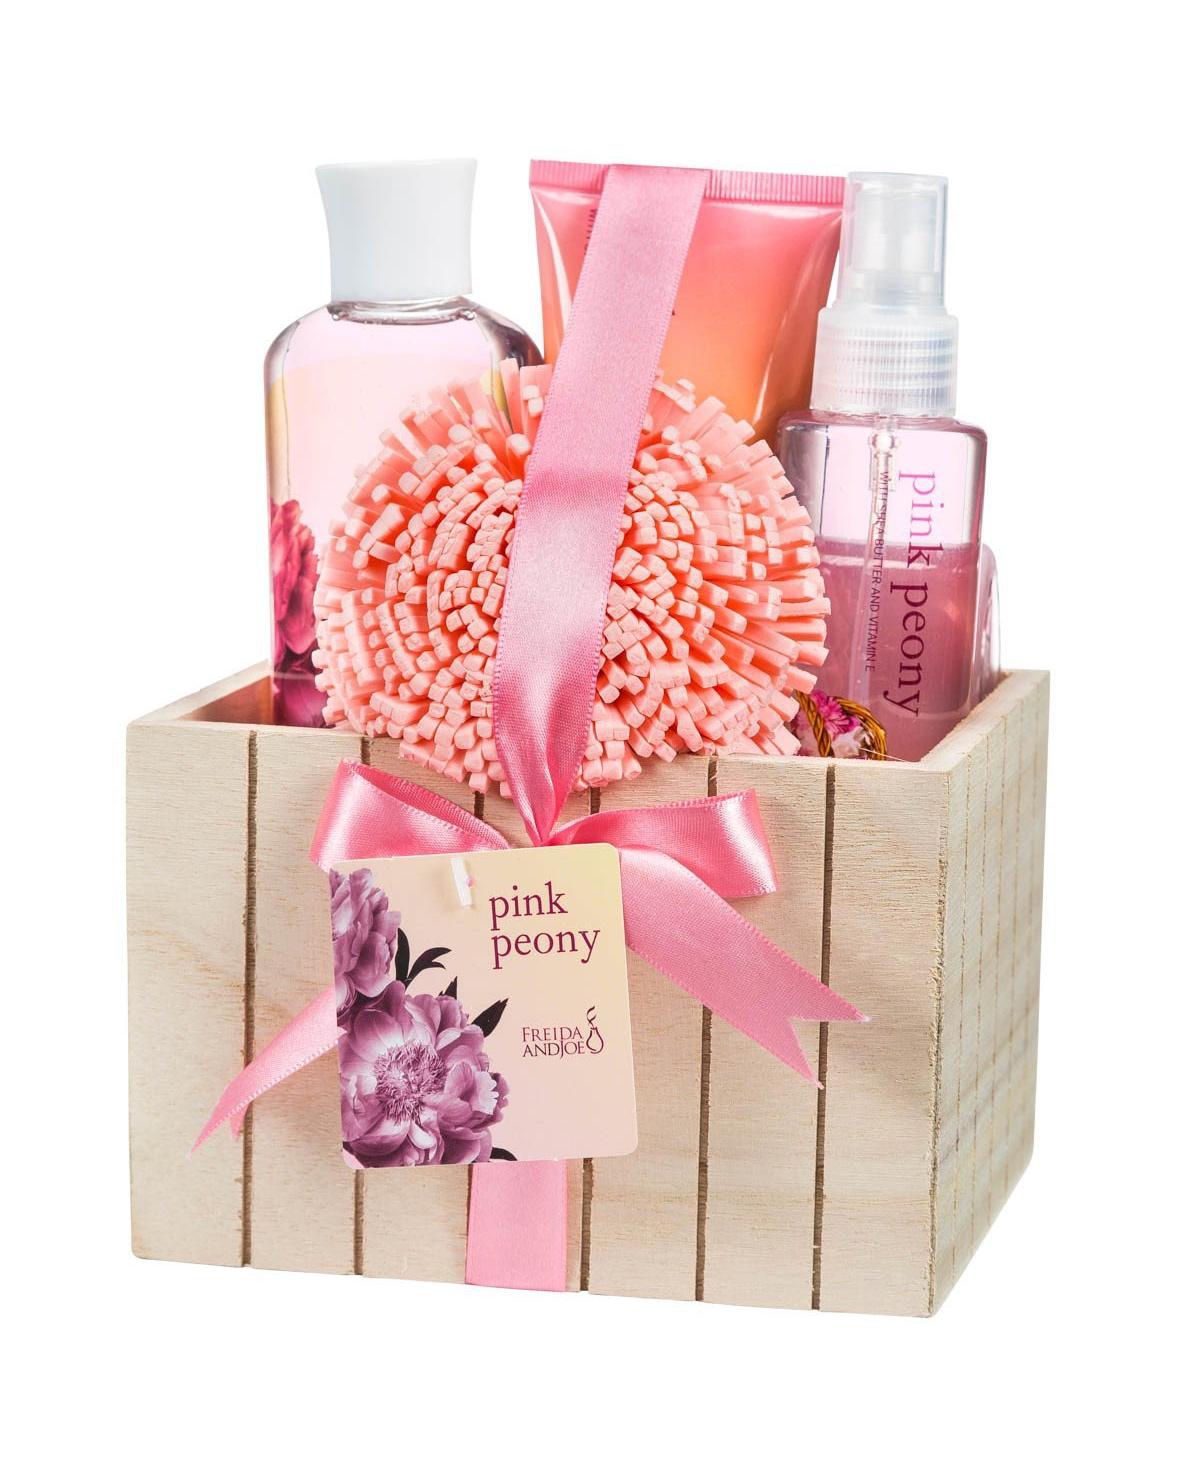 Pink Peony Fragrance Bath & Body Spa Set in Natural Wood Plant Box Luxury Body Care Mothers Day Gifts for Mom - Pink